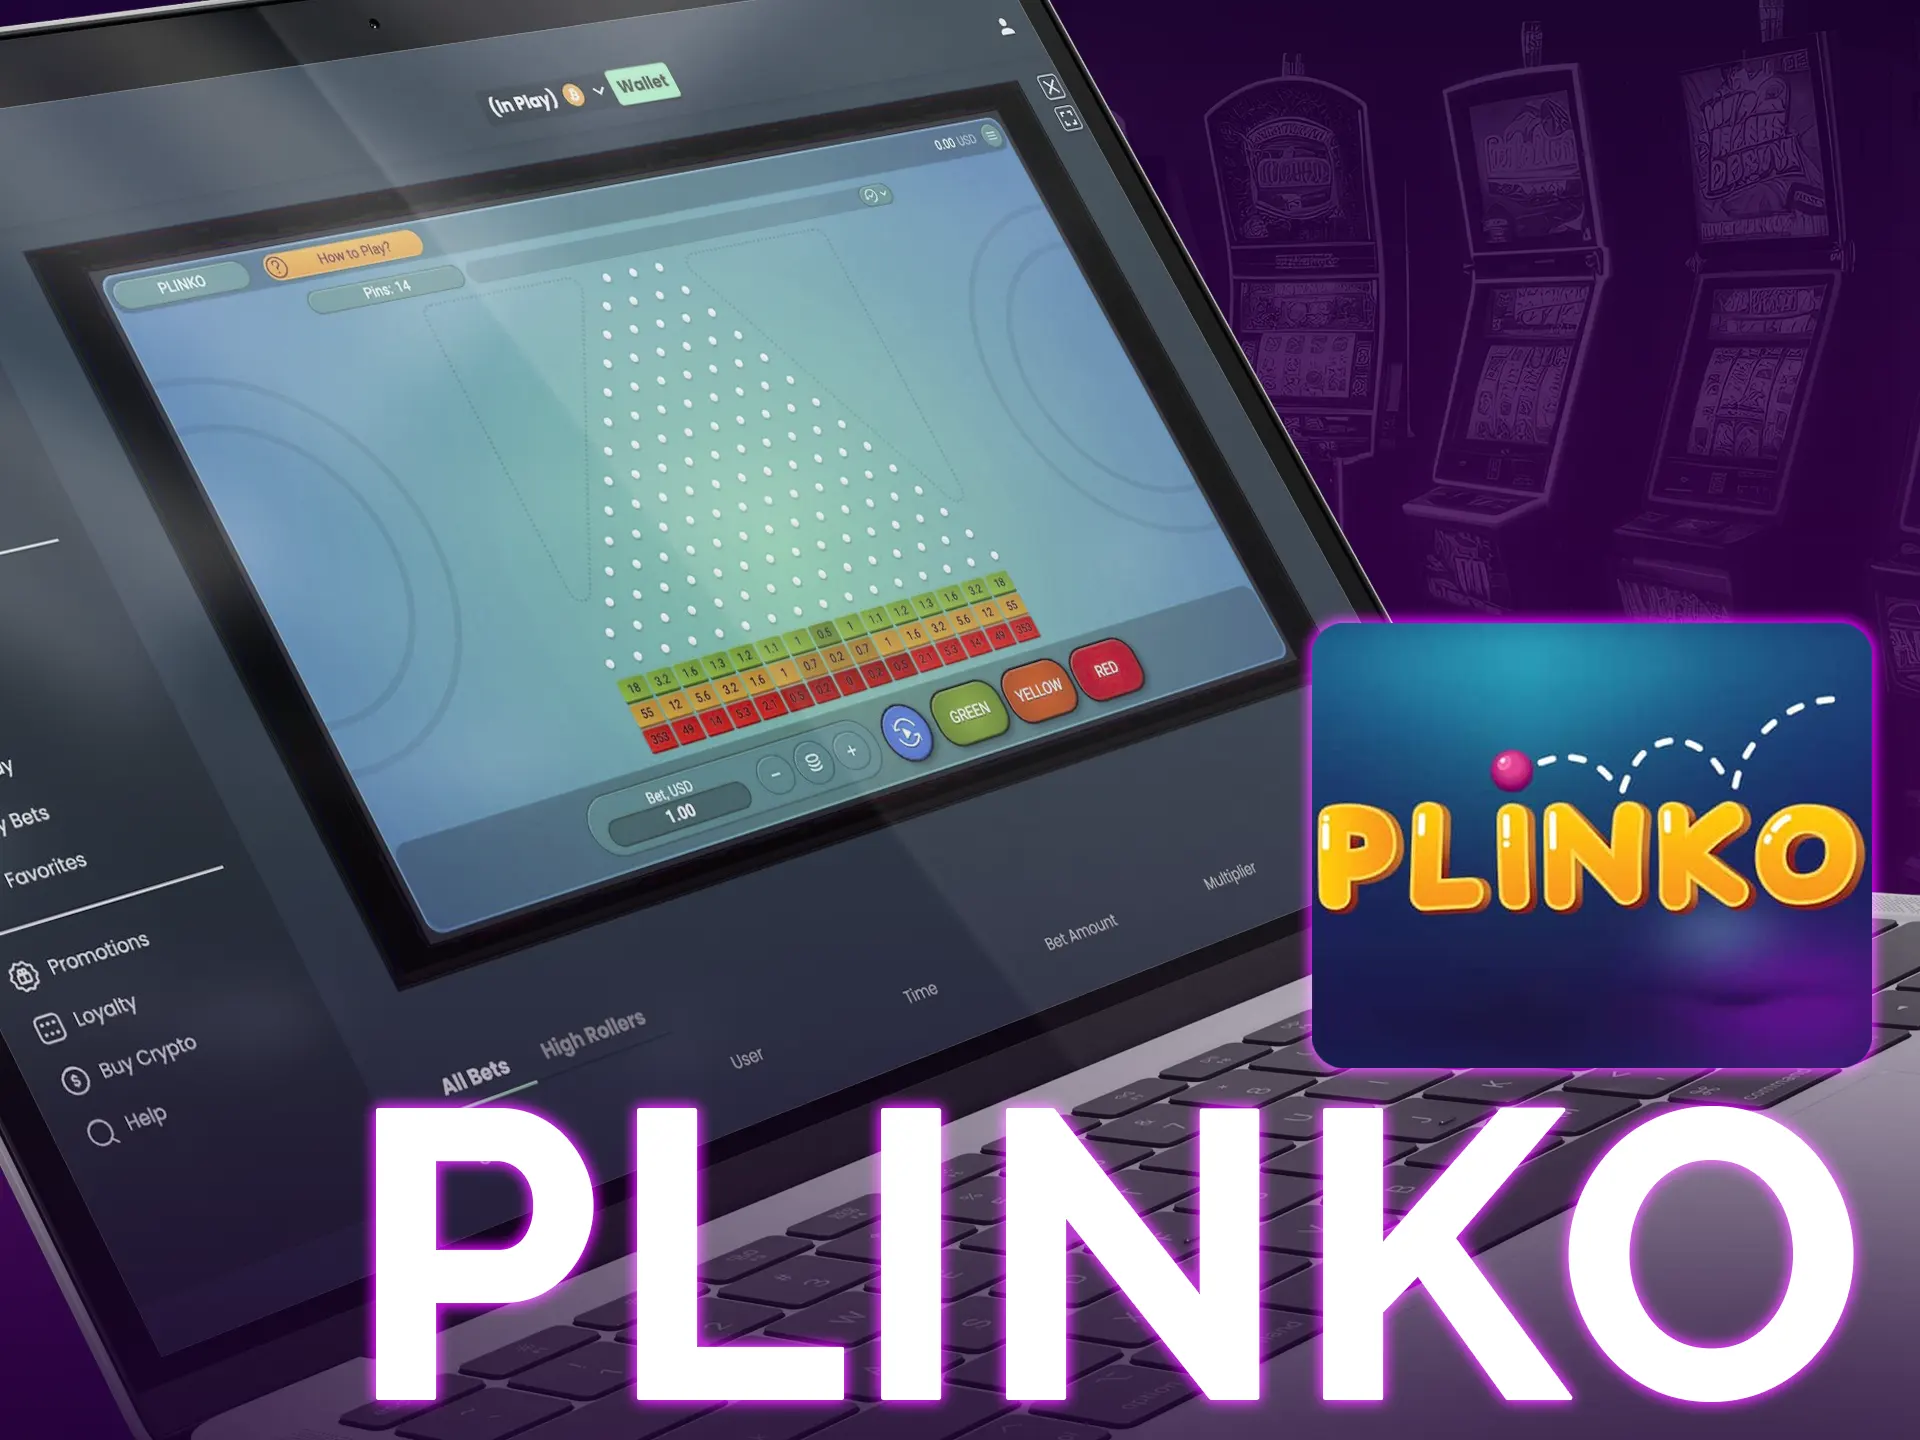 Plinko offers adjustable risk levels and generous payouts.